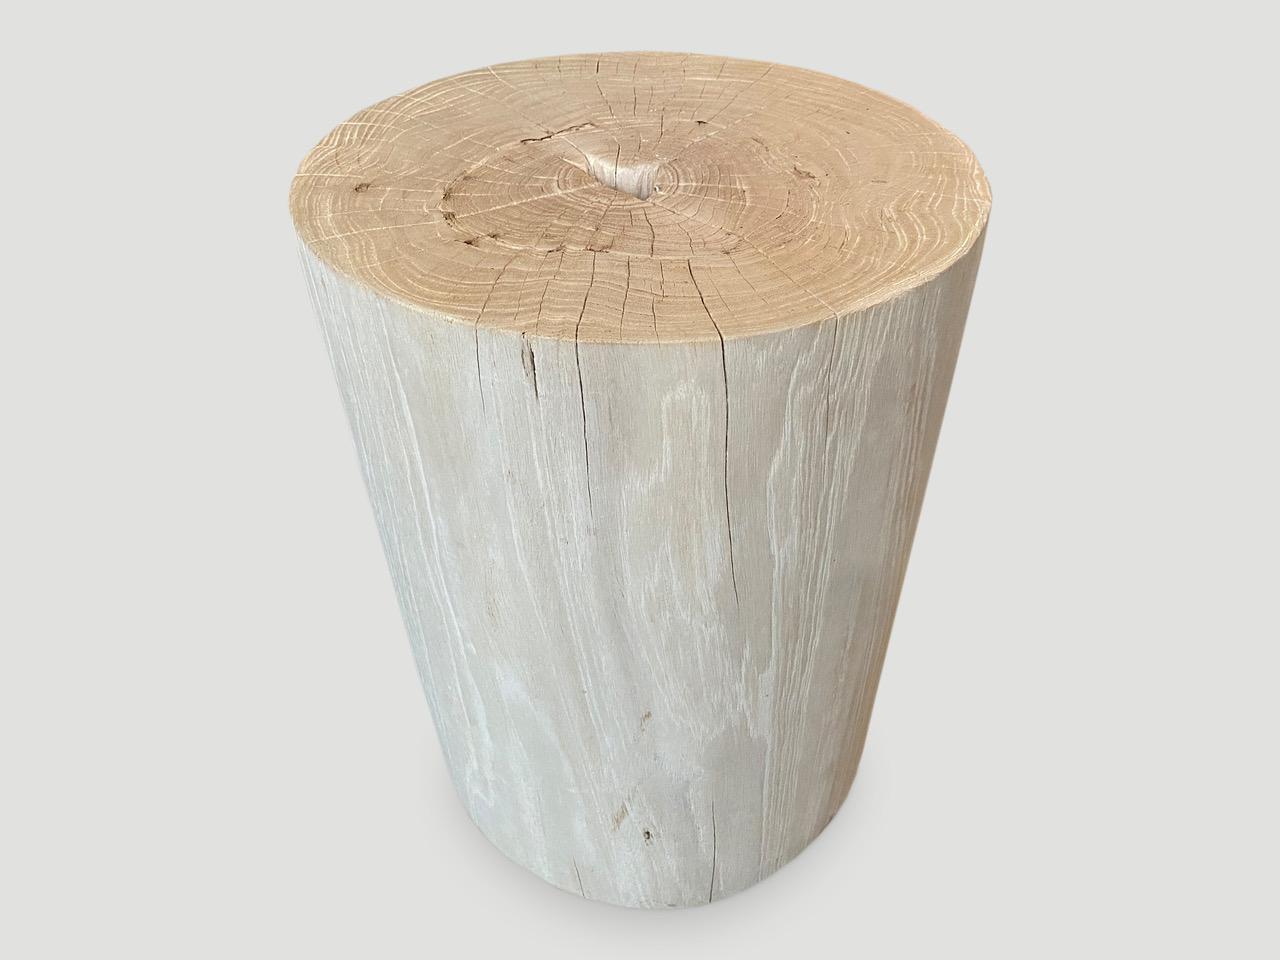 Contemporary Andrianna Shamaris Bleached Teak Wood Cylinder Side Table or Stool